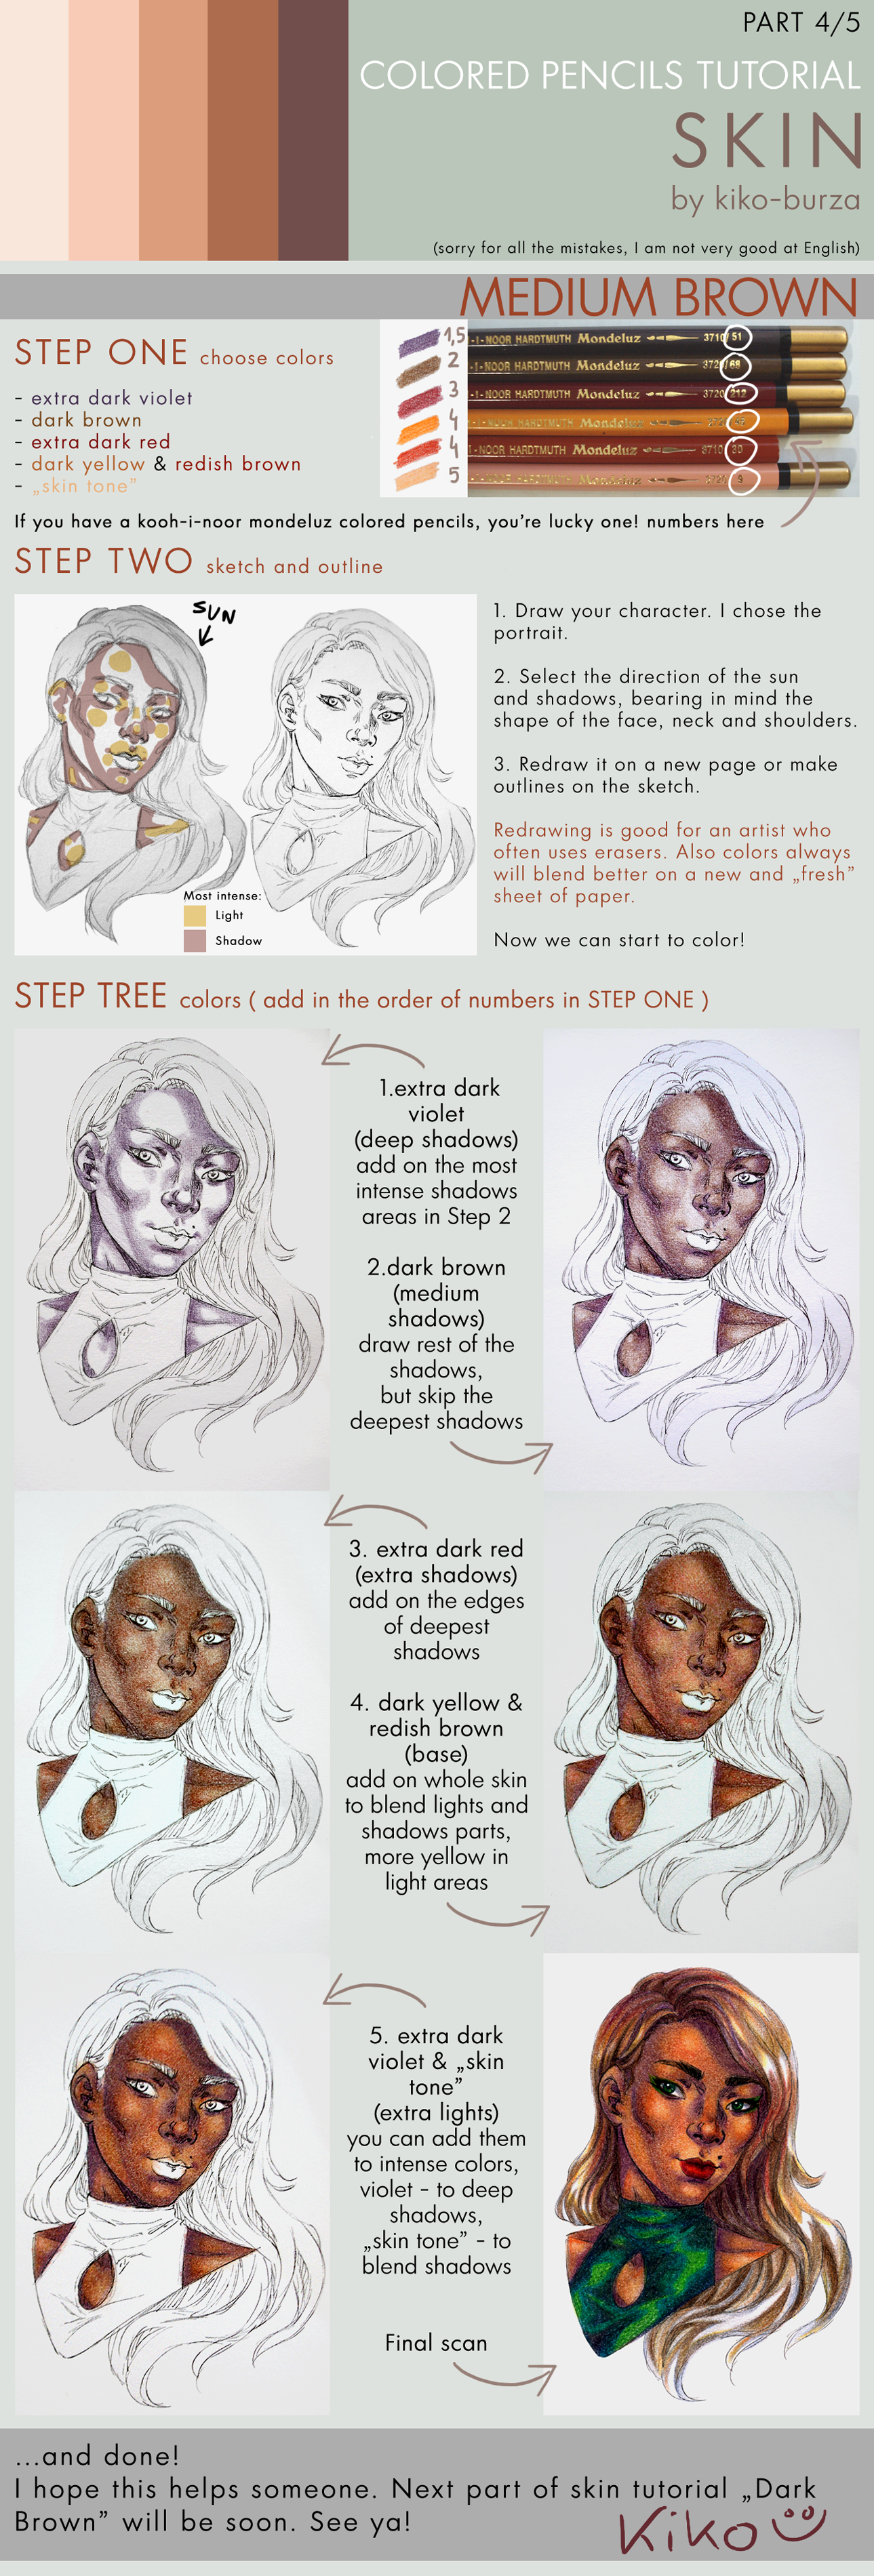 How To Color Skin Tones With Colored Pencils In 5 Easy Steps Tutorial -  Art-n-Fly